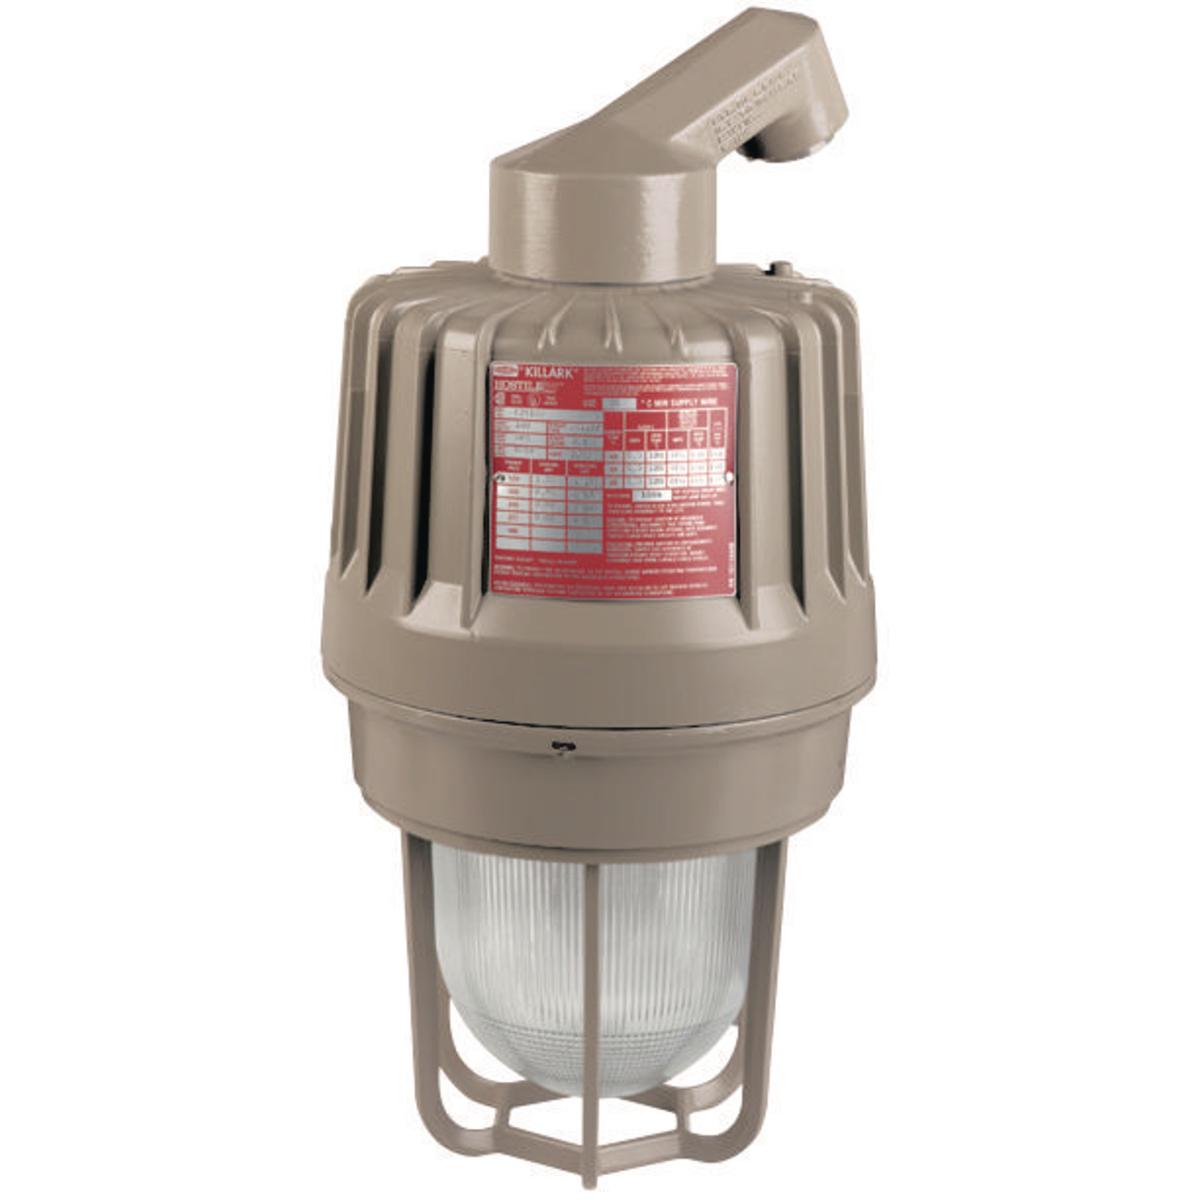 Hubbell EZS075D5 70W 480V High Pressure Sodium 1-1/2" Stanchion Mount  ; Three light sources – High Pressure Sodium (50-400W), Metal Halide (70-400W) and Pulse Start Metal Halide (175-400W) ; Mounting choice –Pendant, ceiling, 25˚ stanchion or 90˚ wall mount, all with “wi